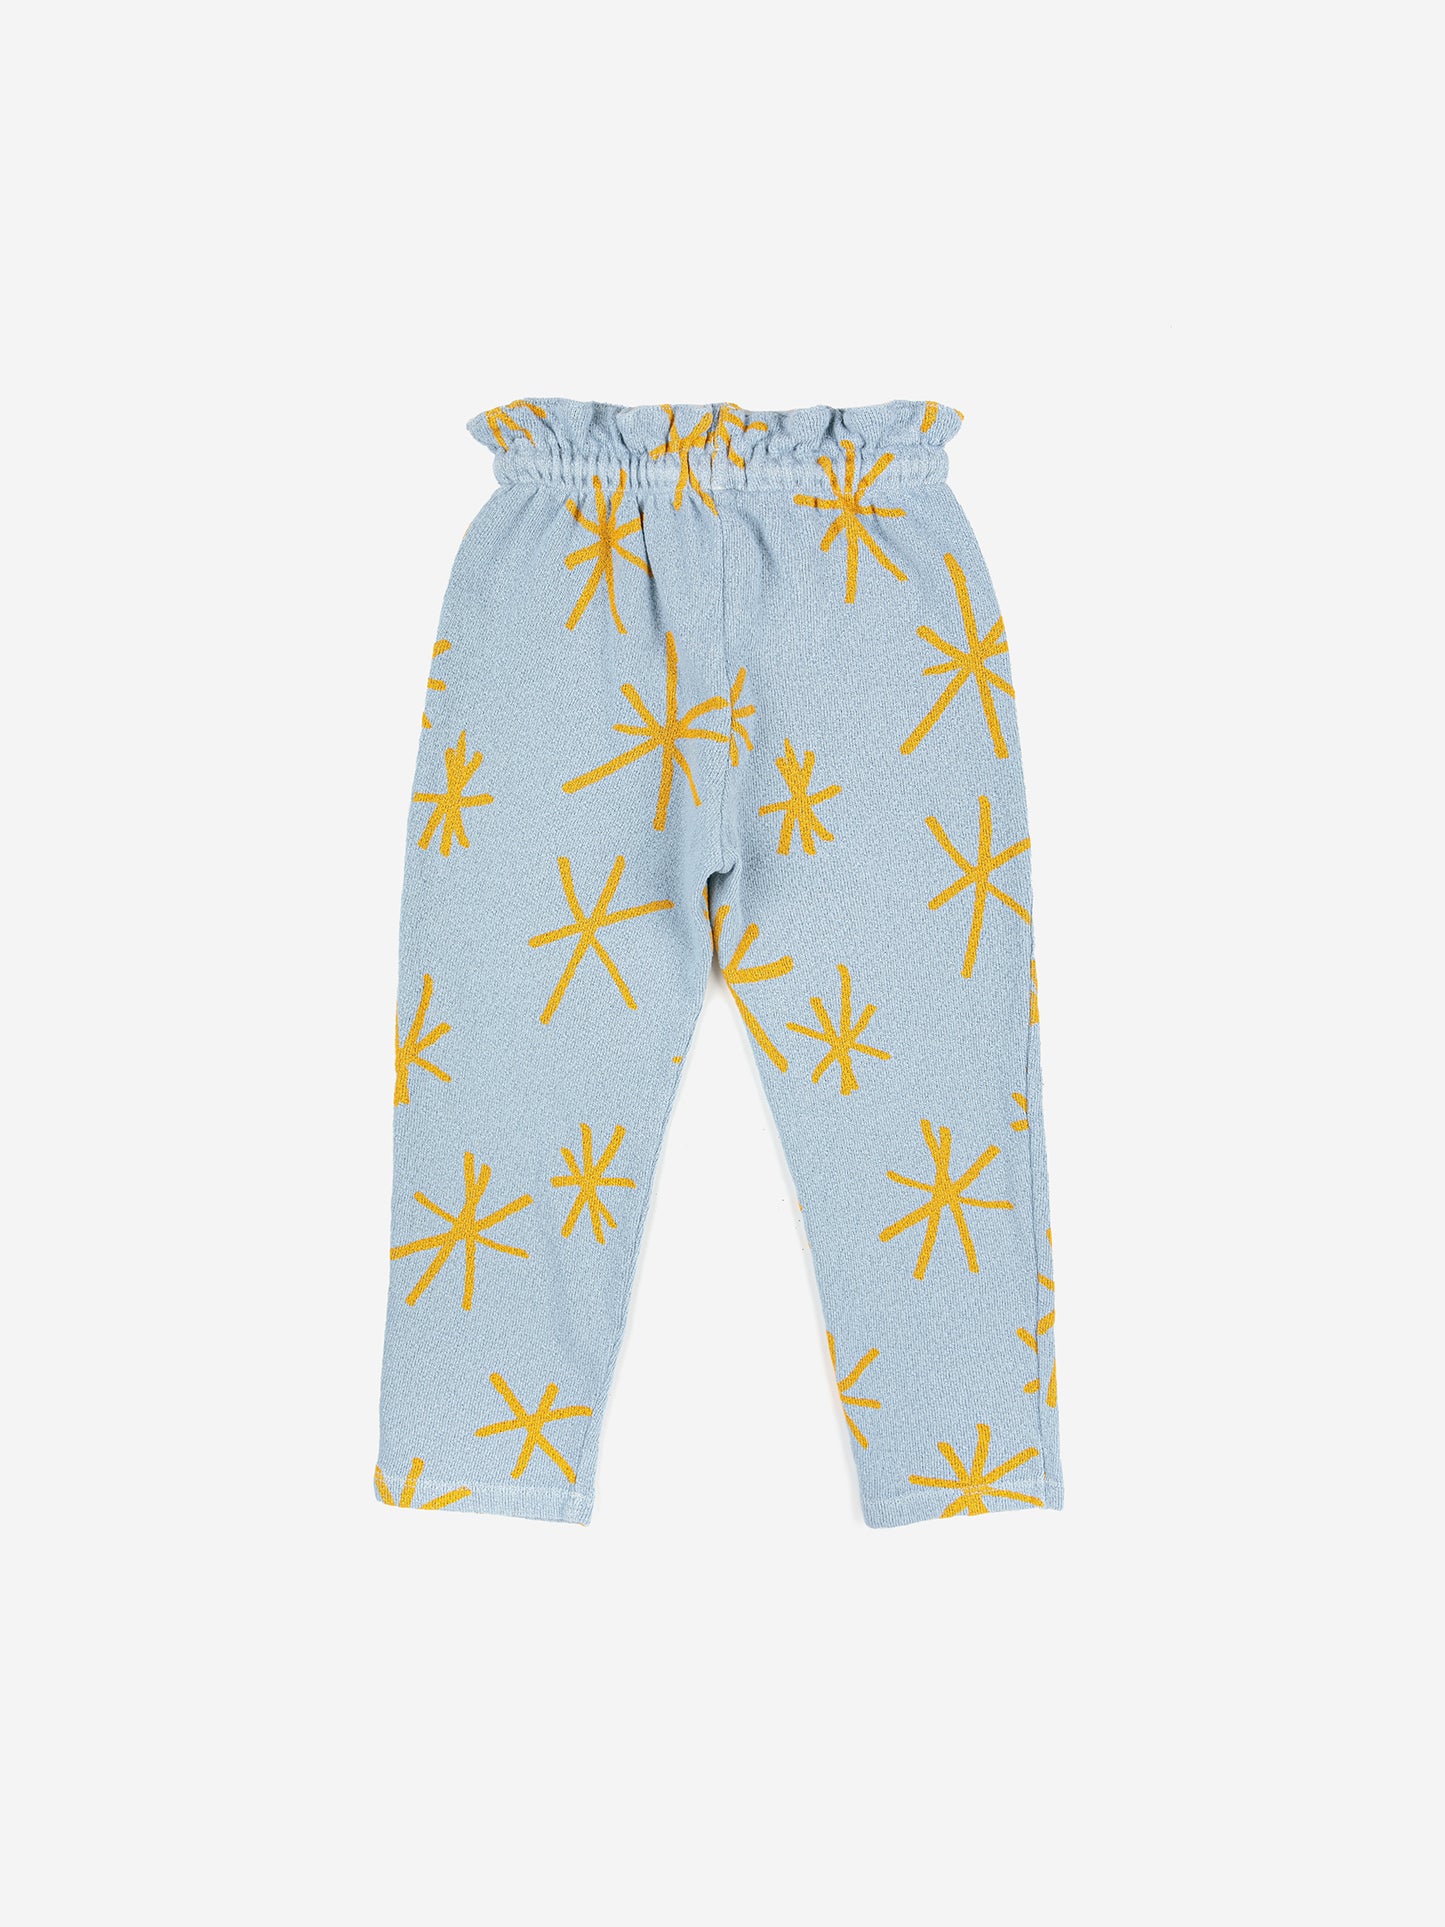 Sparkle Jogging Pants by Bobo Choses. 100% BCI cotton powder blue jogging pants with yellow sparkle print. Designed with adjustable ruffled waistband, ankle length and sooo soft inside. It has a baggy fit.   Made ethically and sustainably in Portugal for Bobo Choses.